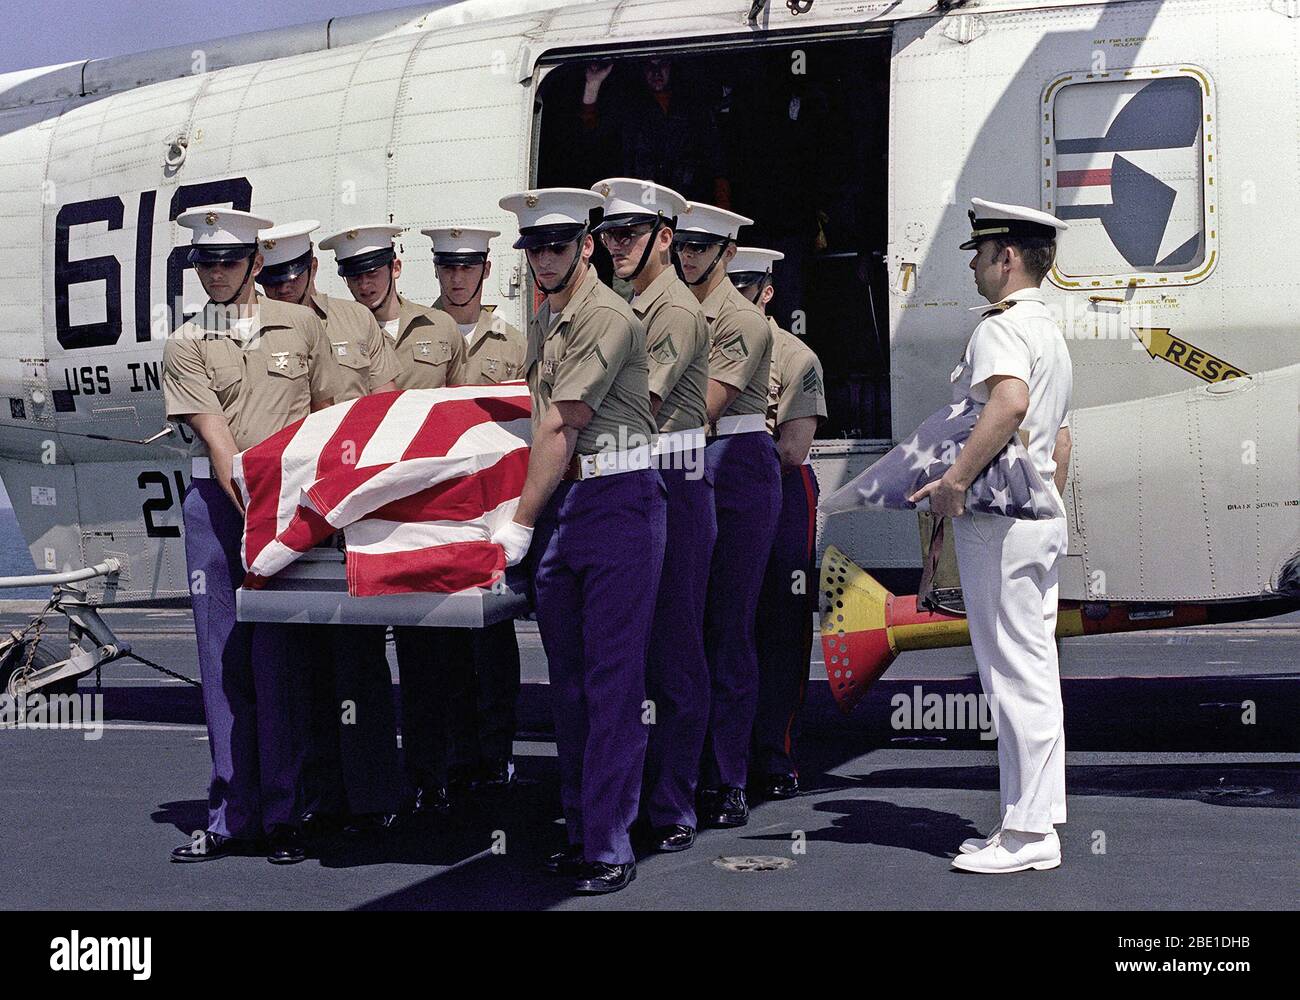 1982 - U.S. Marines aboard the aircraft carrier USS INDEPENDENCE (CV-62) offload the remains of a commander from an SH-3 Sea King helciopter, attached to Carrier Air Wing 6 (CVW-6). Stock Photo